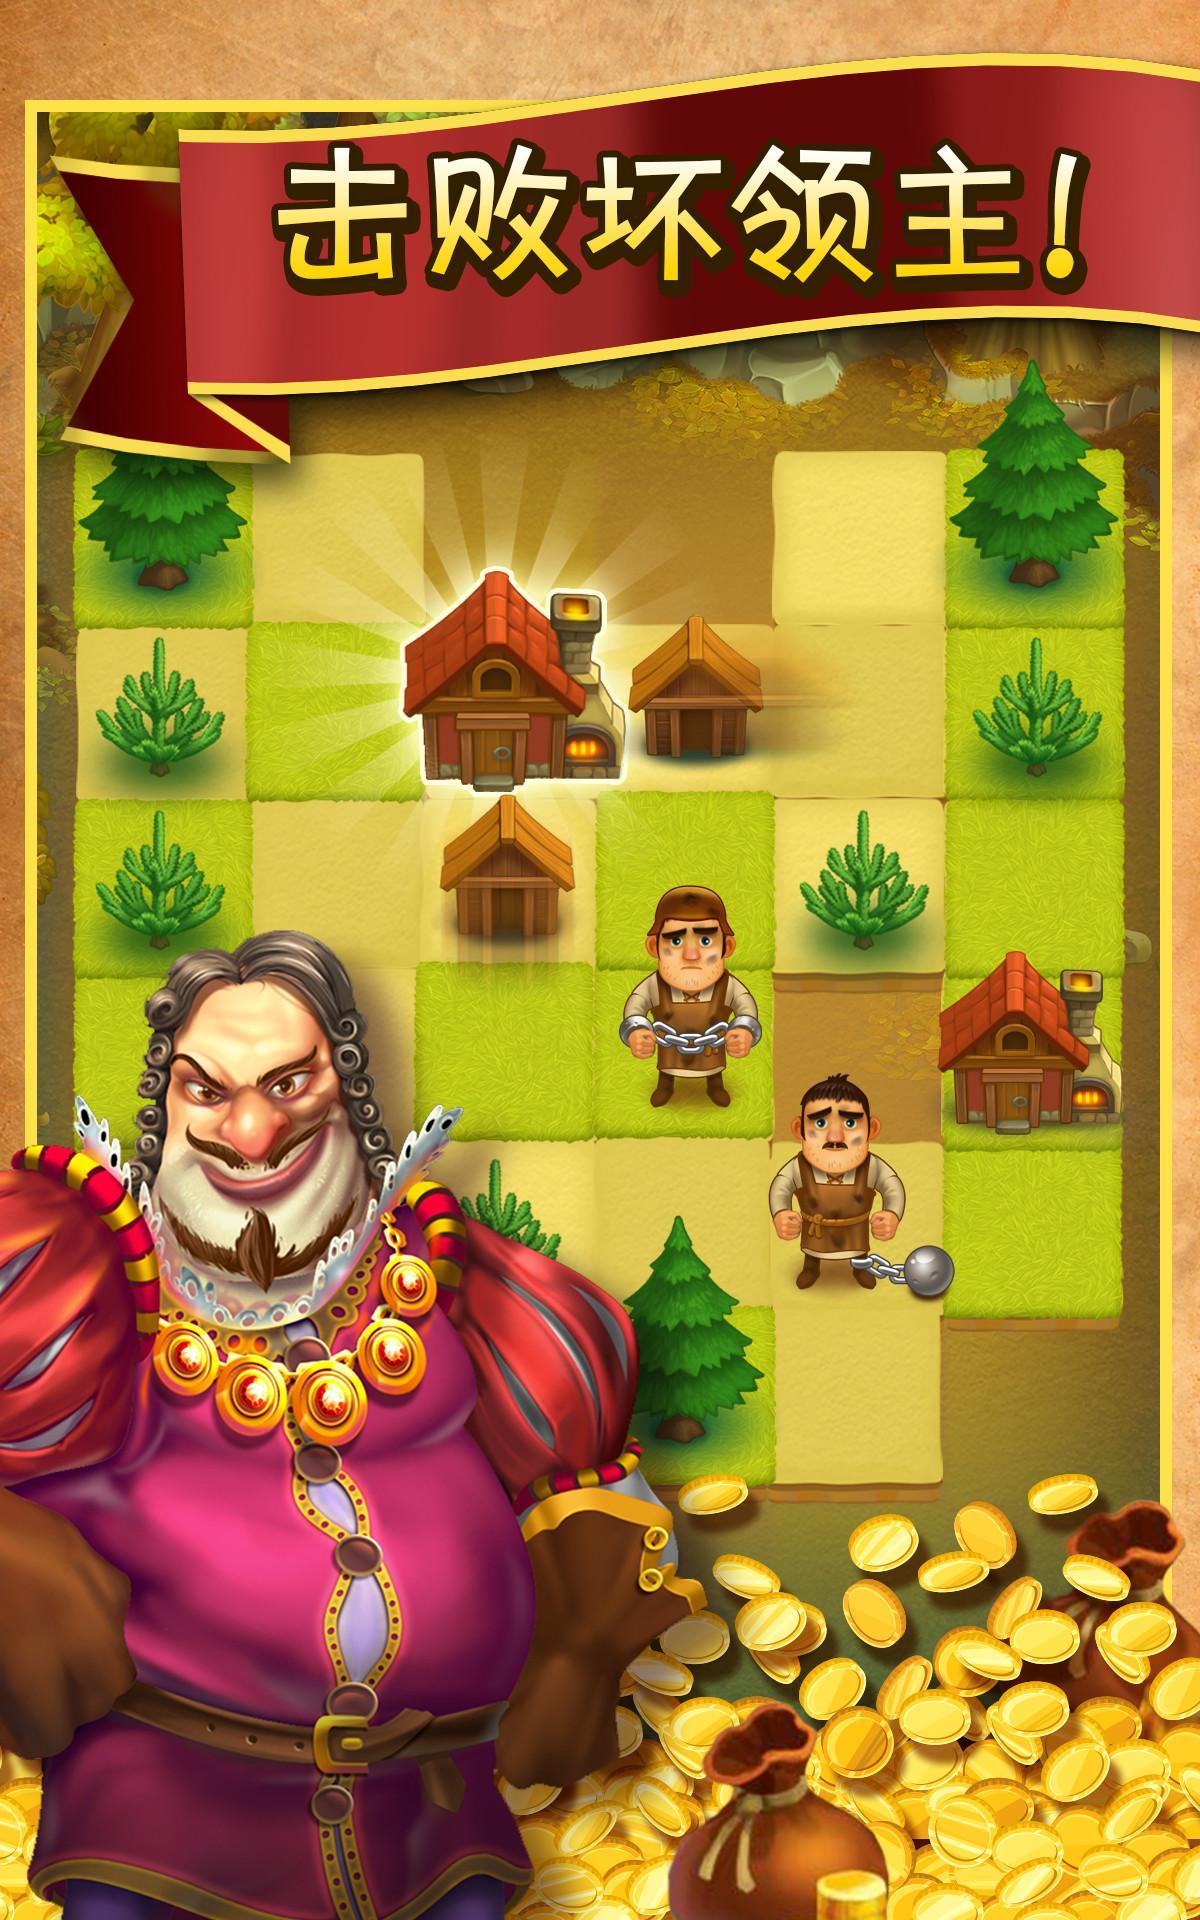 plugged in robin hood the legend of sherwood game